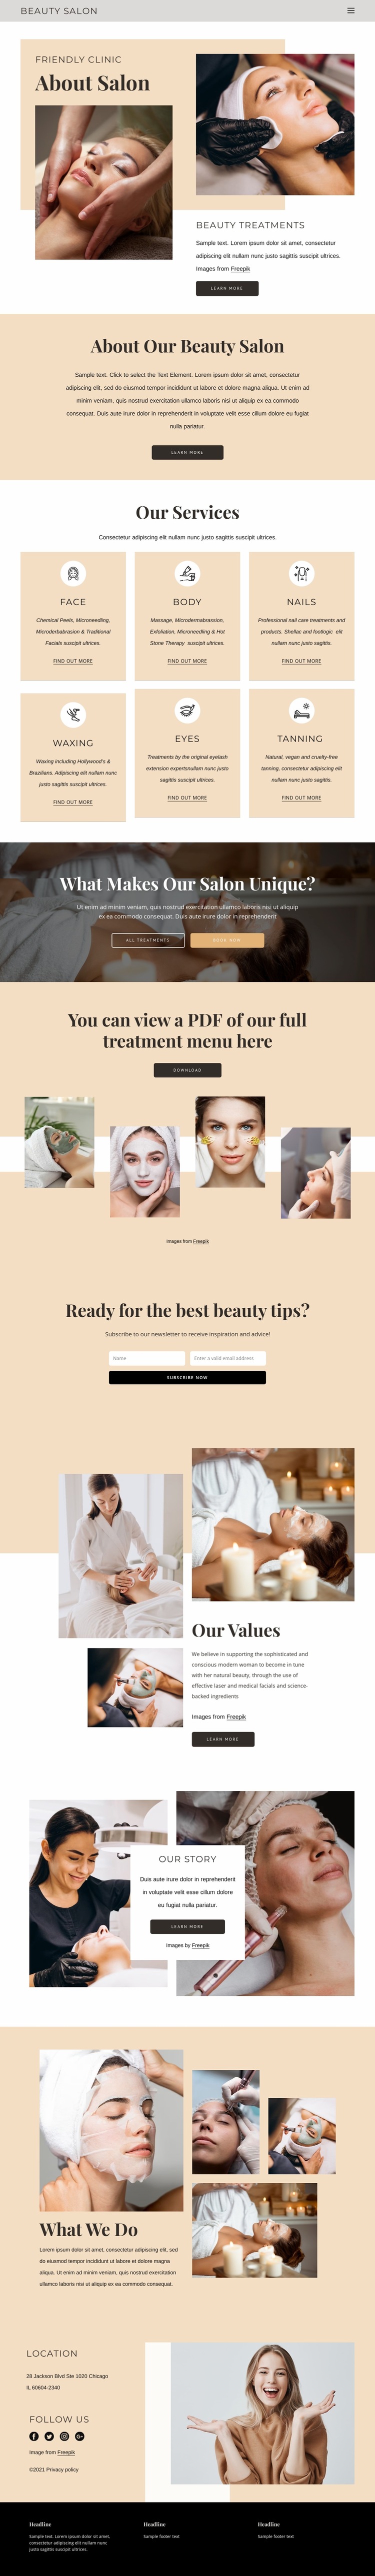 Beauty and aesthetic treatments Website Builder Templates